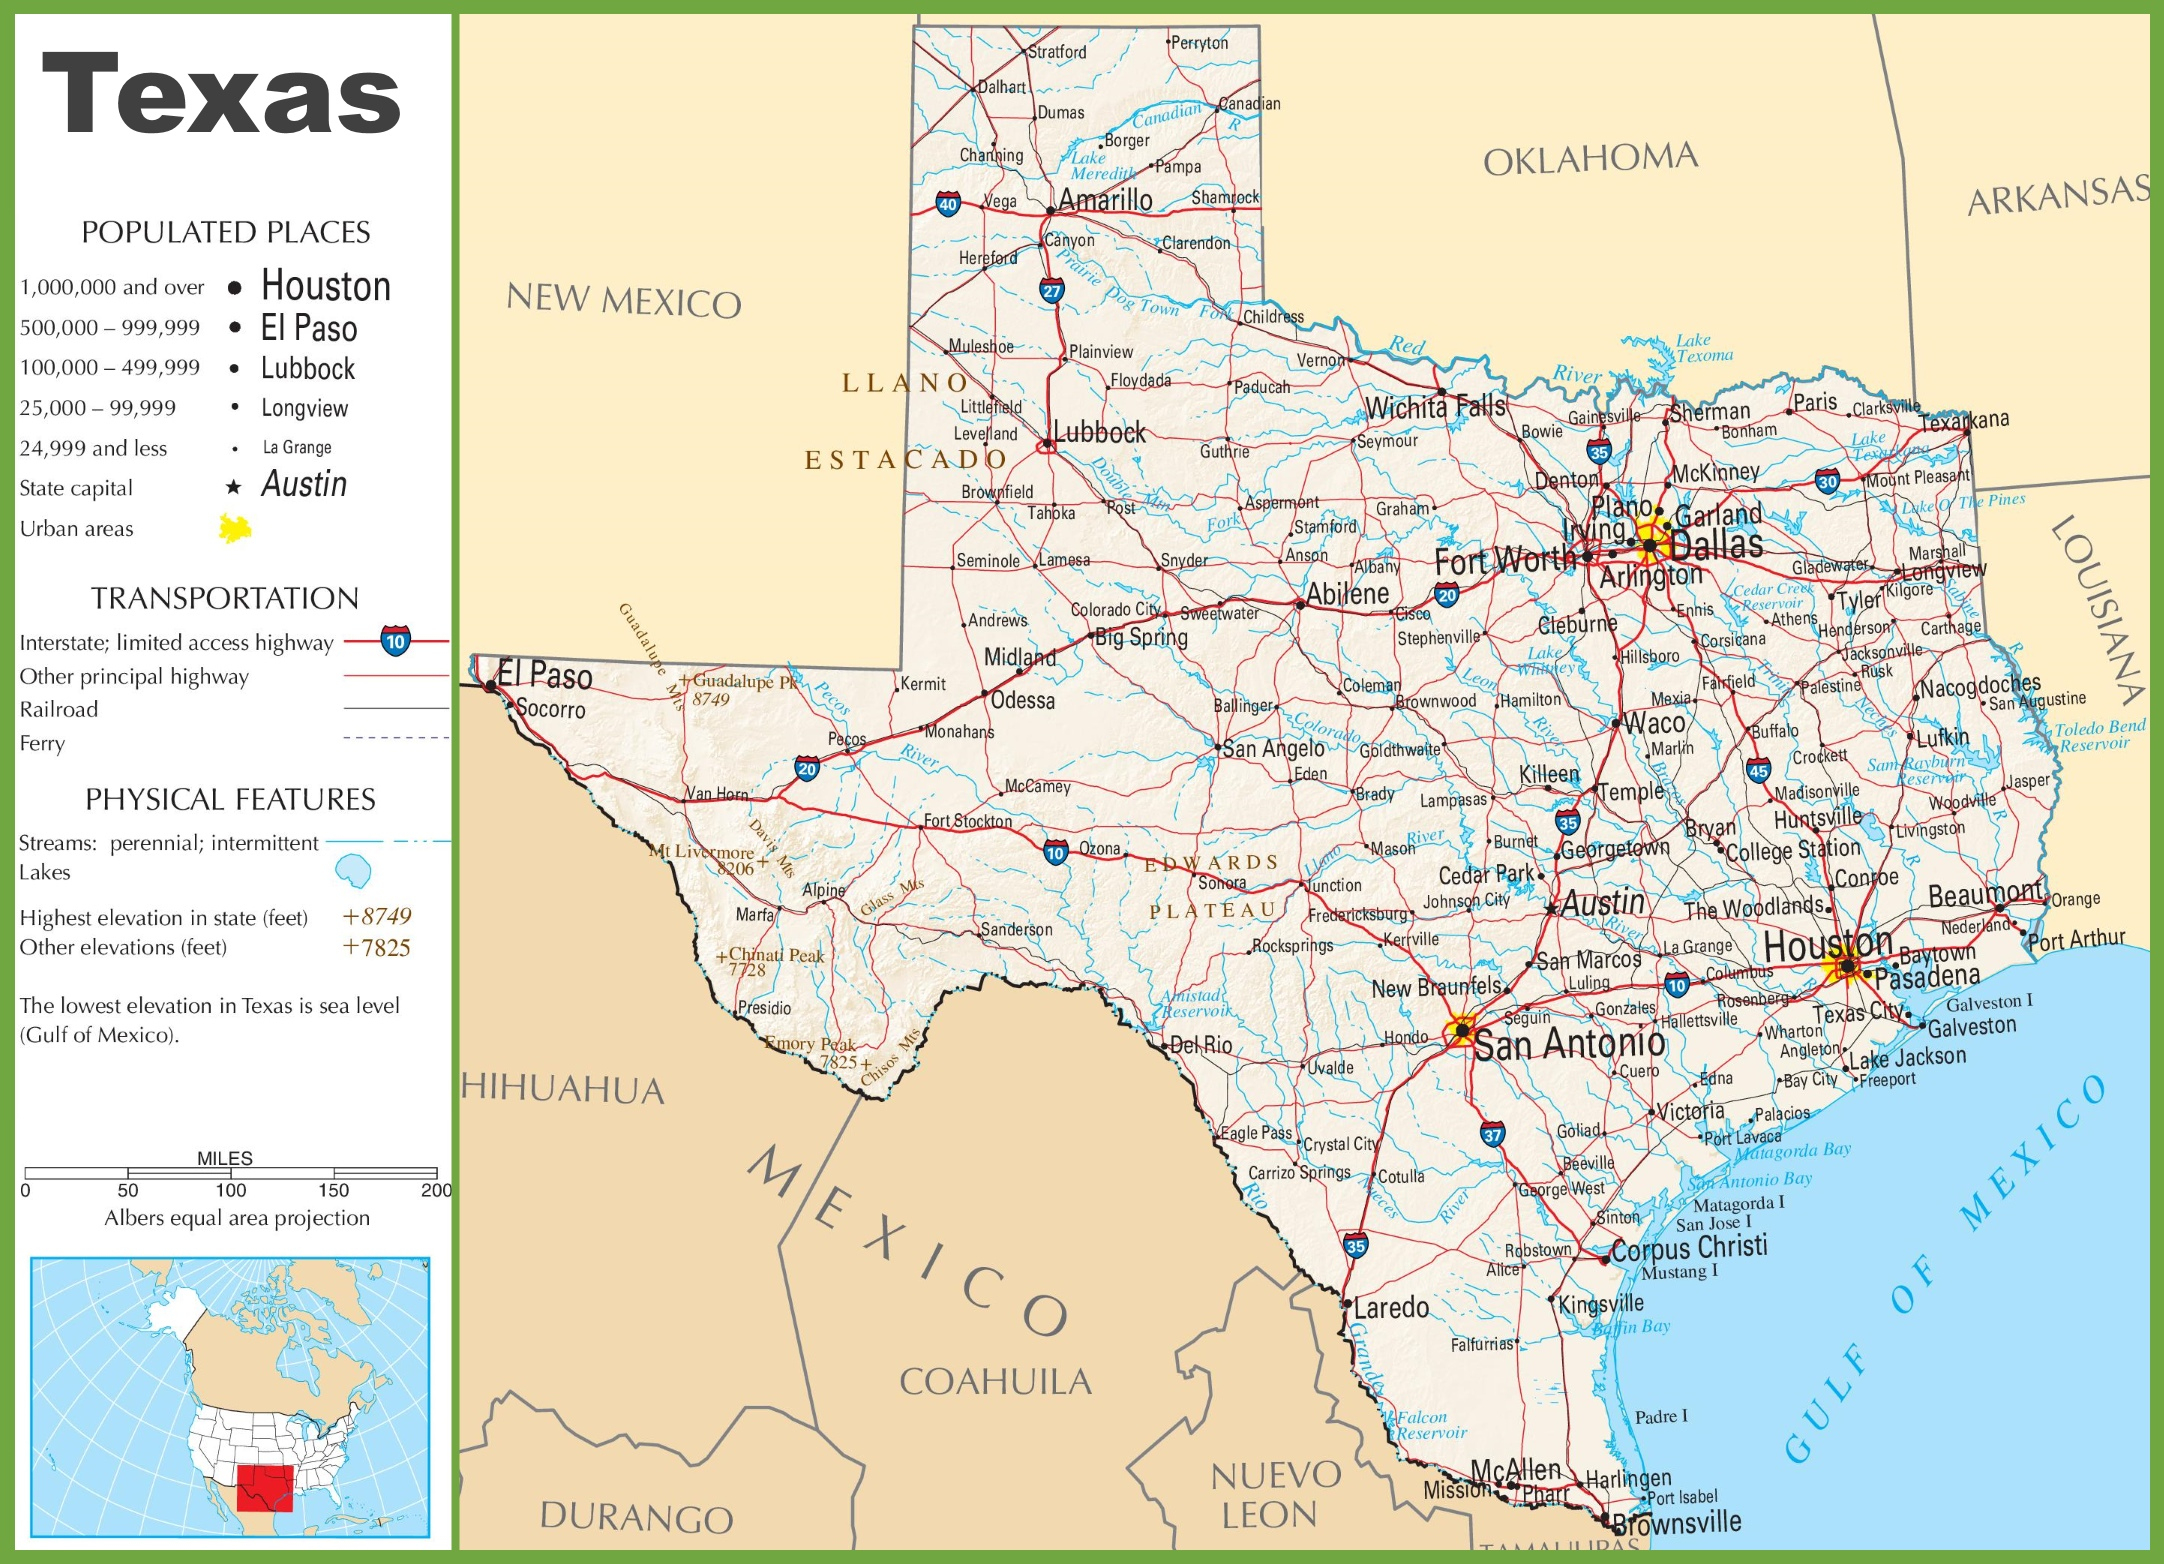 Texas Highway Map - Show Me Houston Texas On The Map